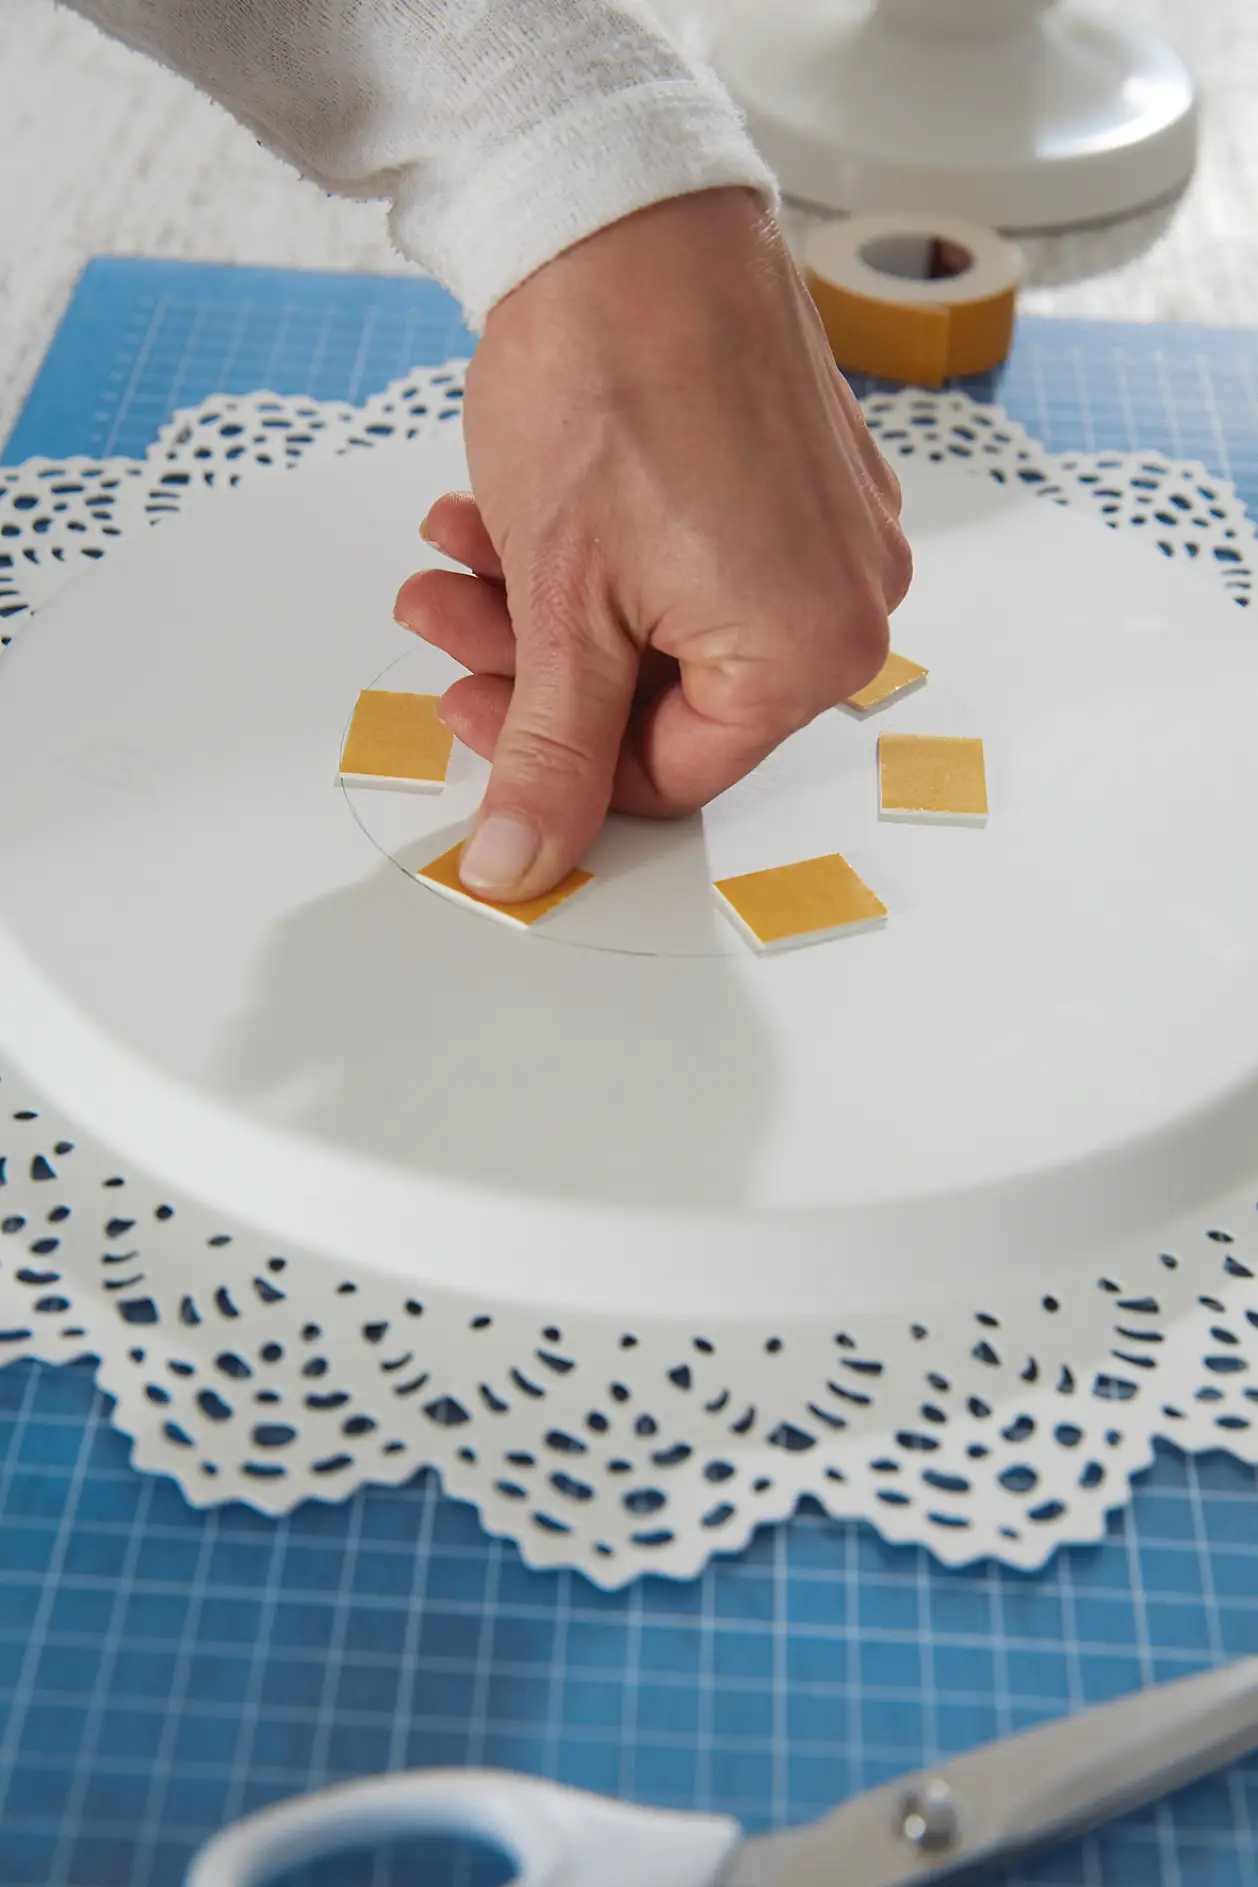 Press the tesa Powerbond® INDOOR tape for five seconds on the plate.